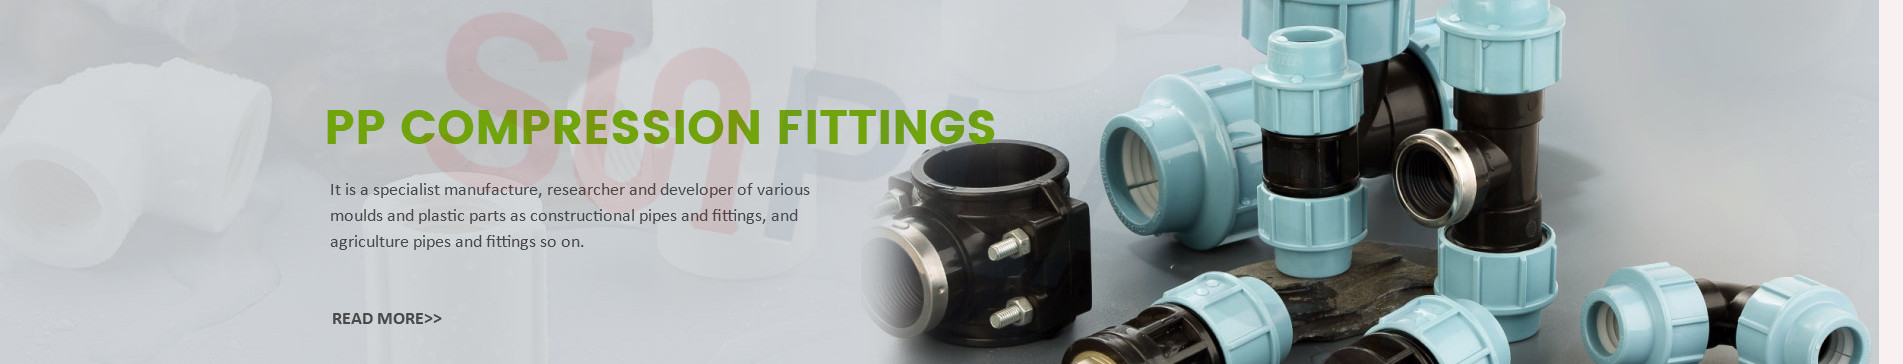 pp-compression-fittings